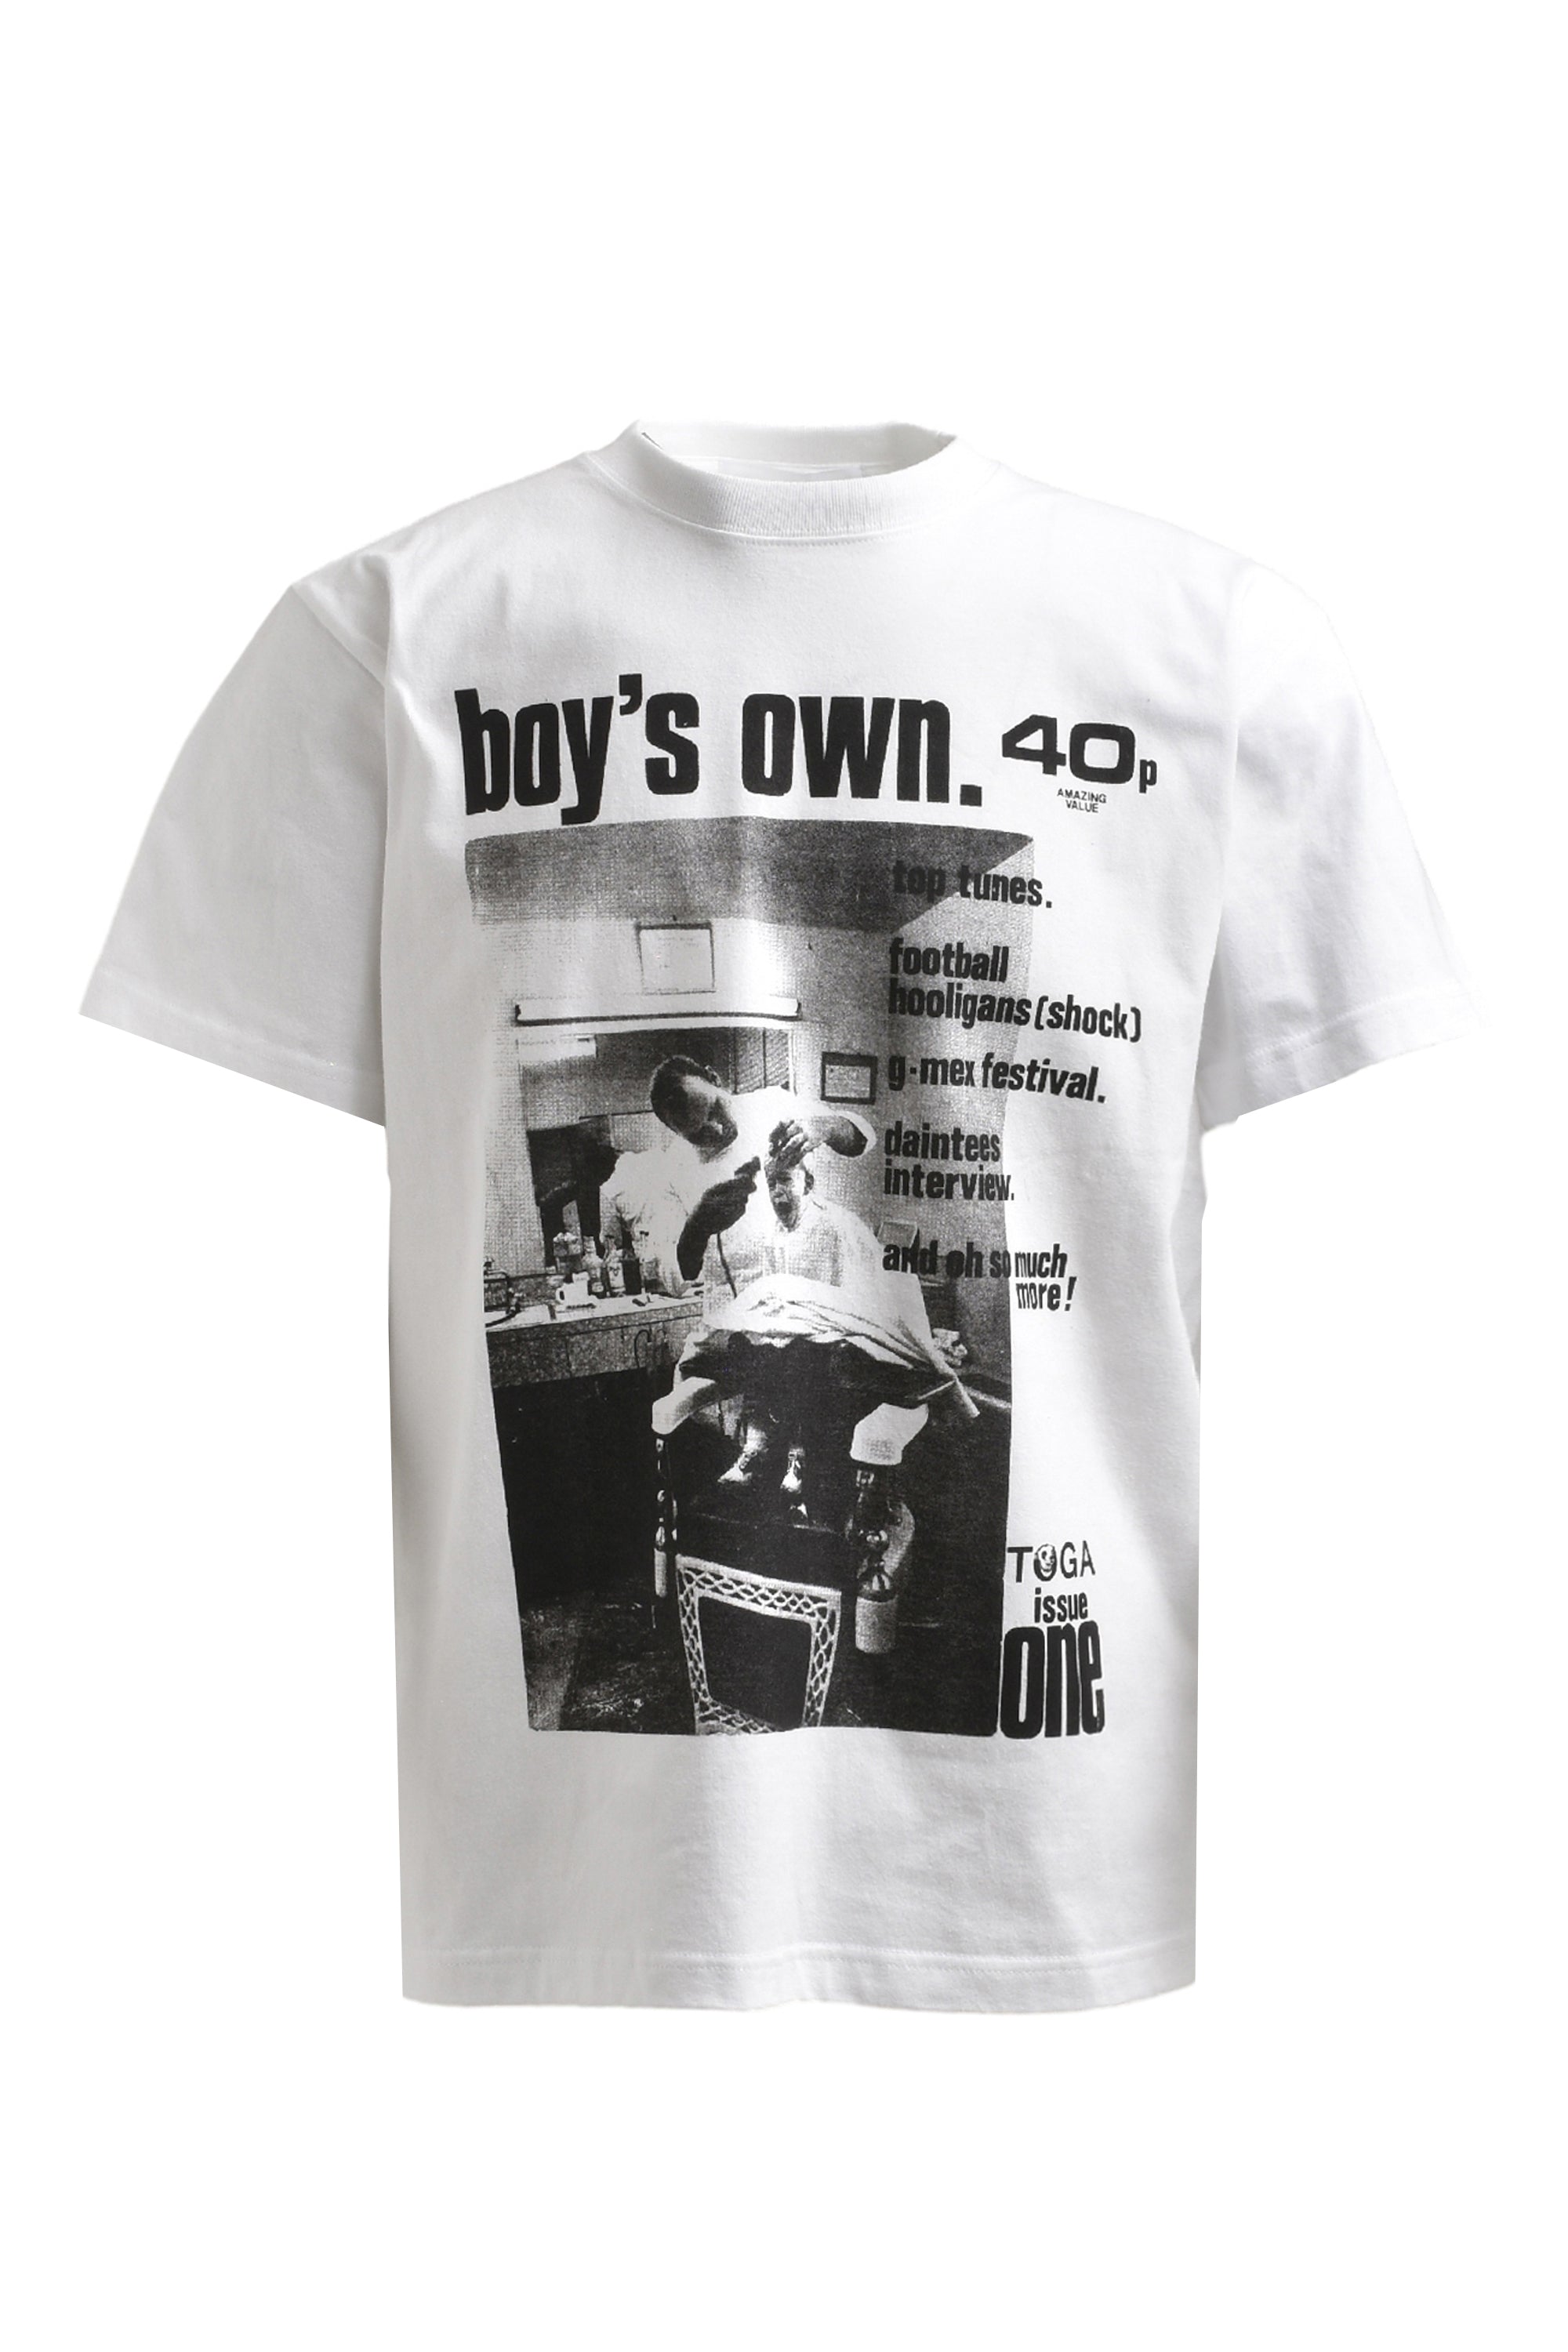 TOGA トーガ SS24 PRINT T-SHIRT ISSUE ONE BOY'S OWN SP / WHT - NUBIAN